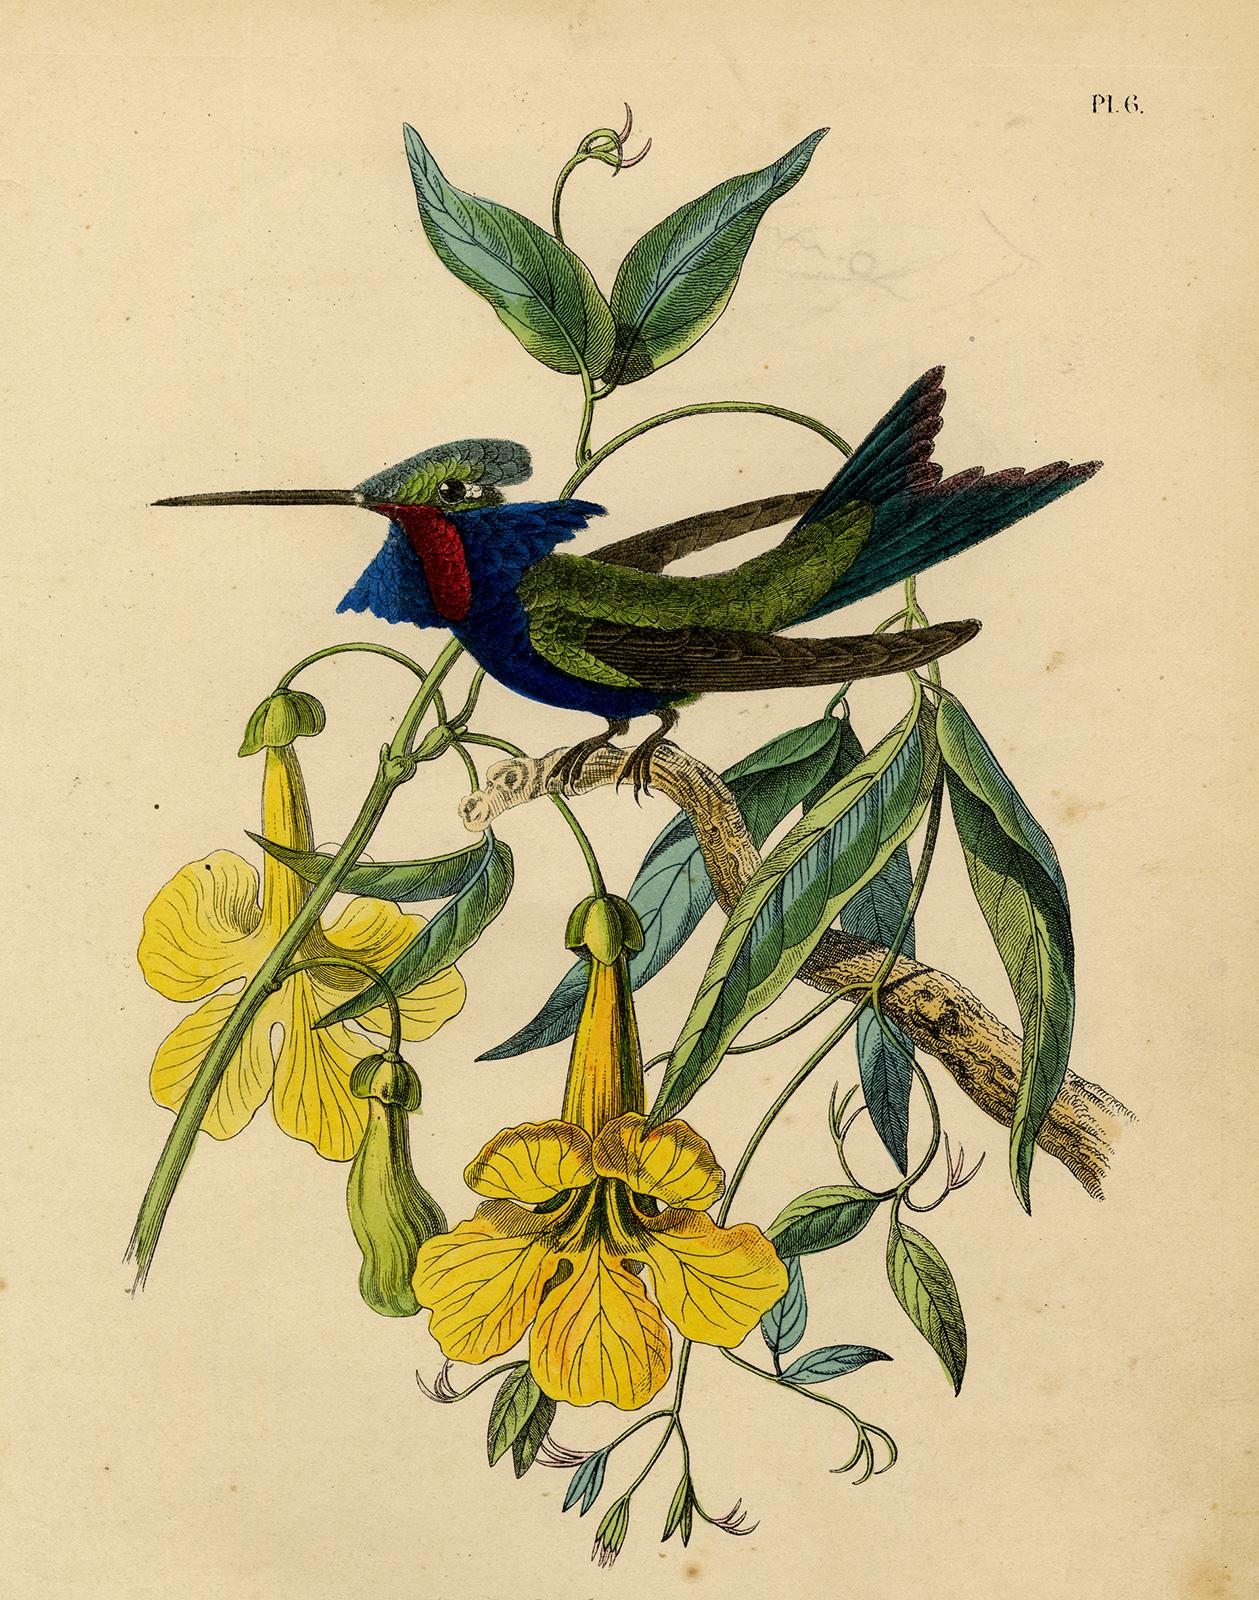 Jean-Emmanuel-Marie Le Maout Print - Decorative print of a hummingbird on bignonia by Le Maout - Engraving - 19th c.